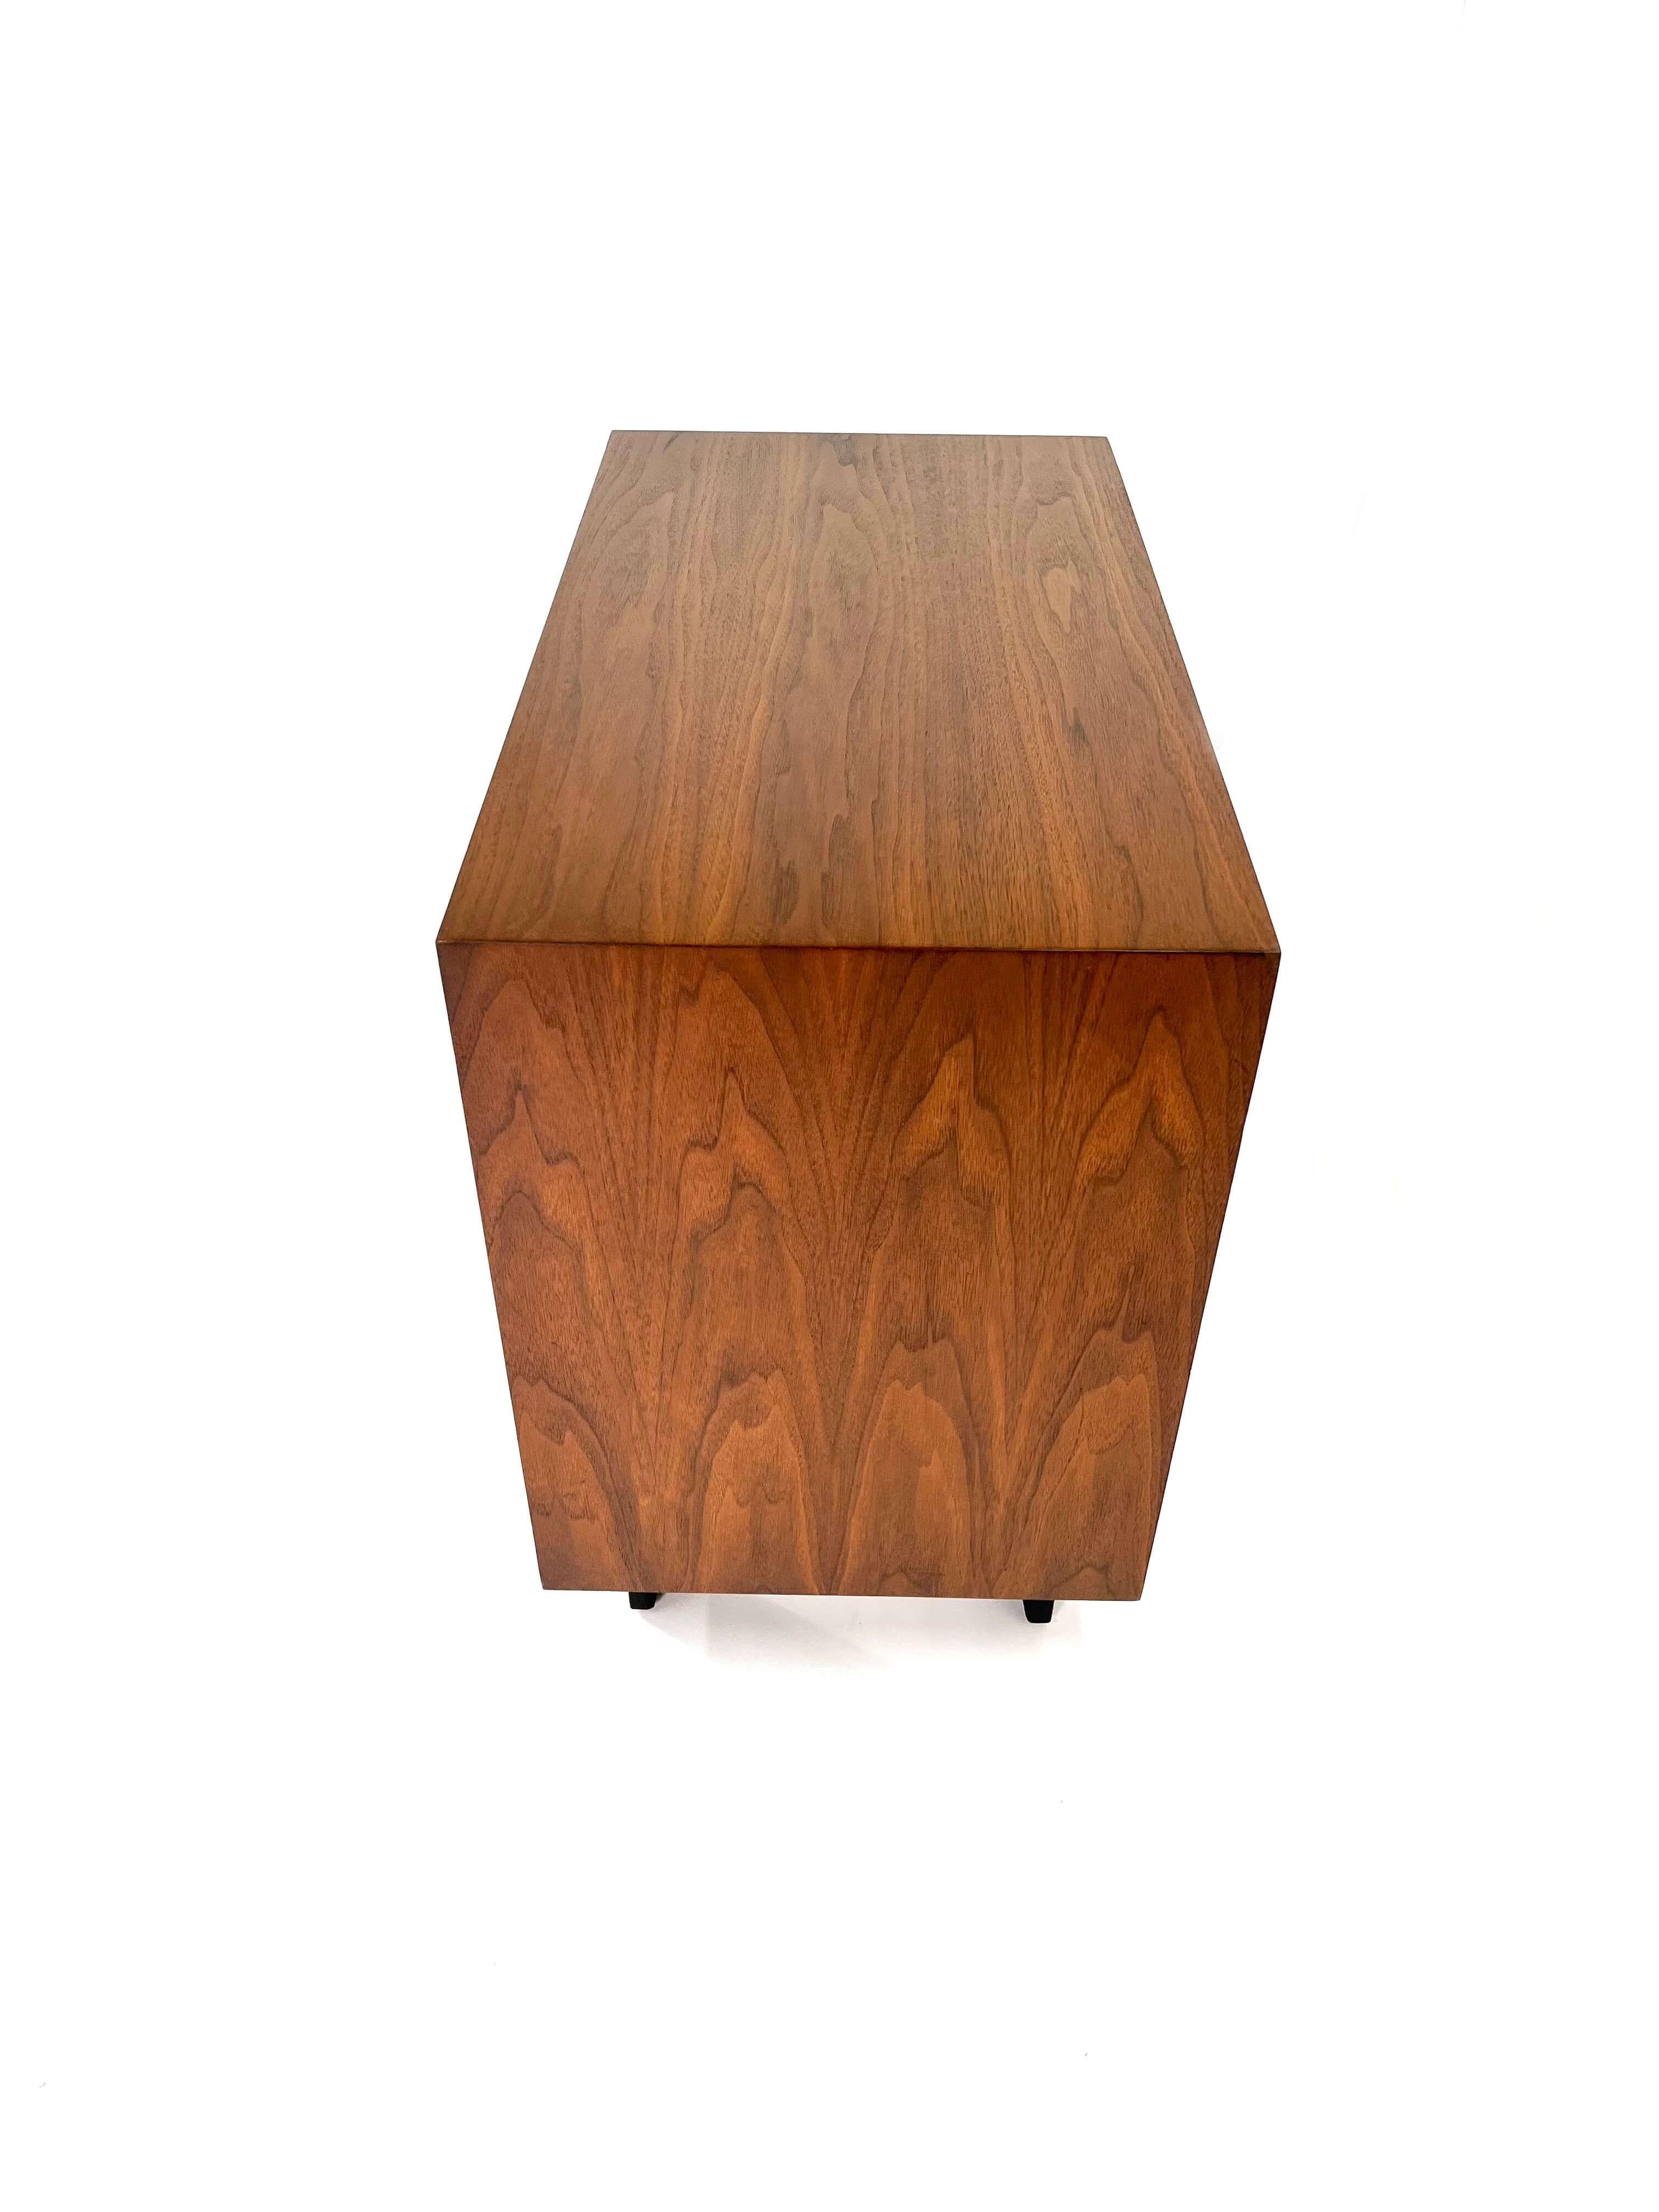 North American George Nelson Walnut Two Door Cabinet for Herman Miller